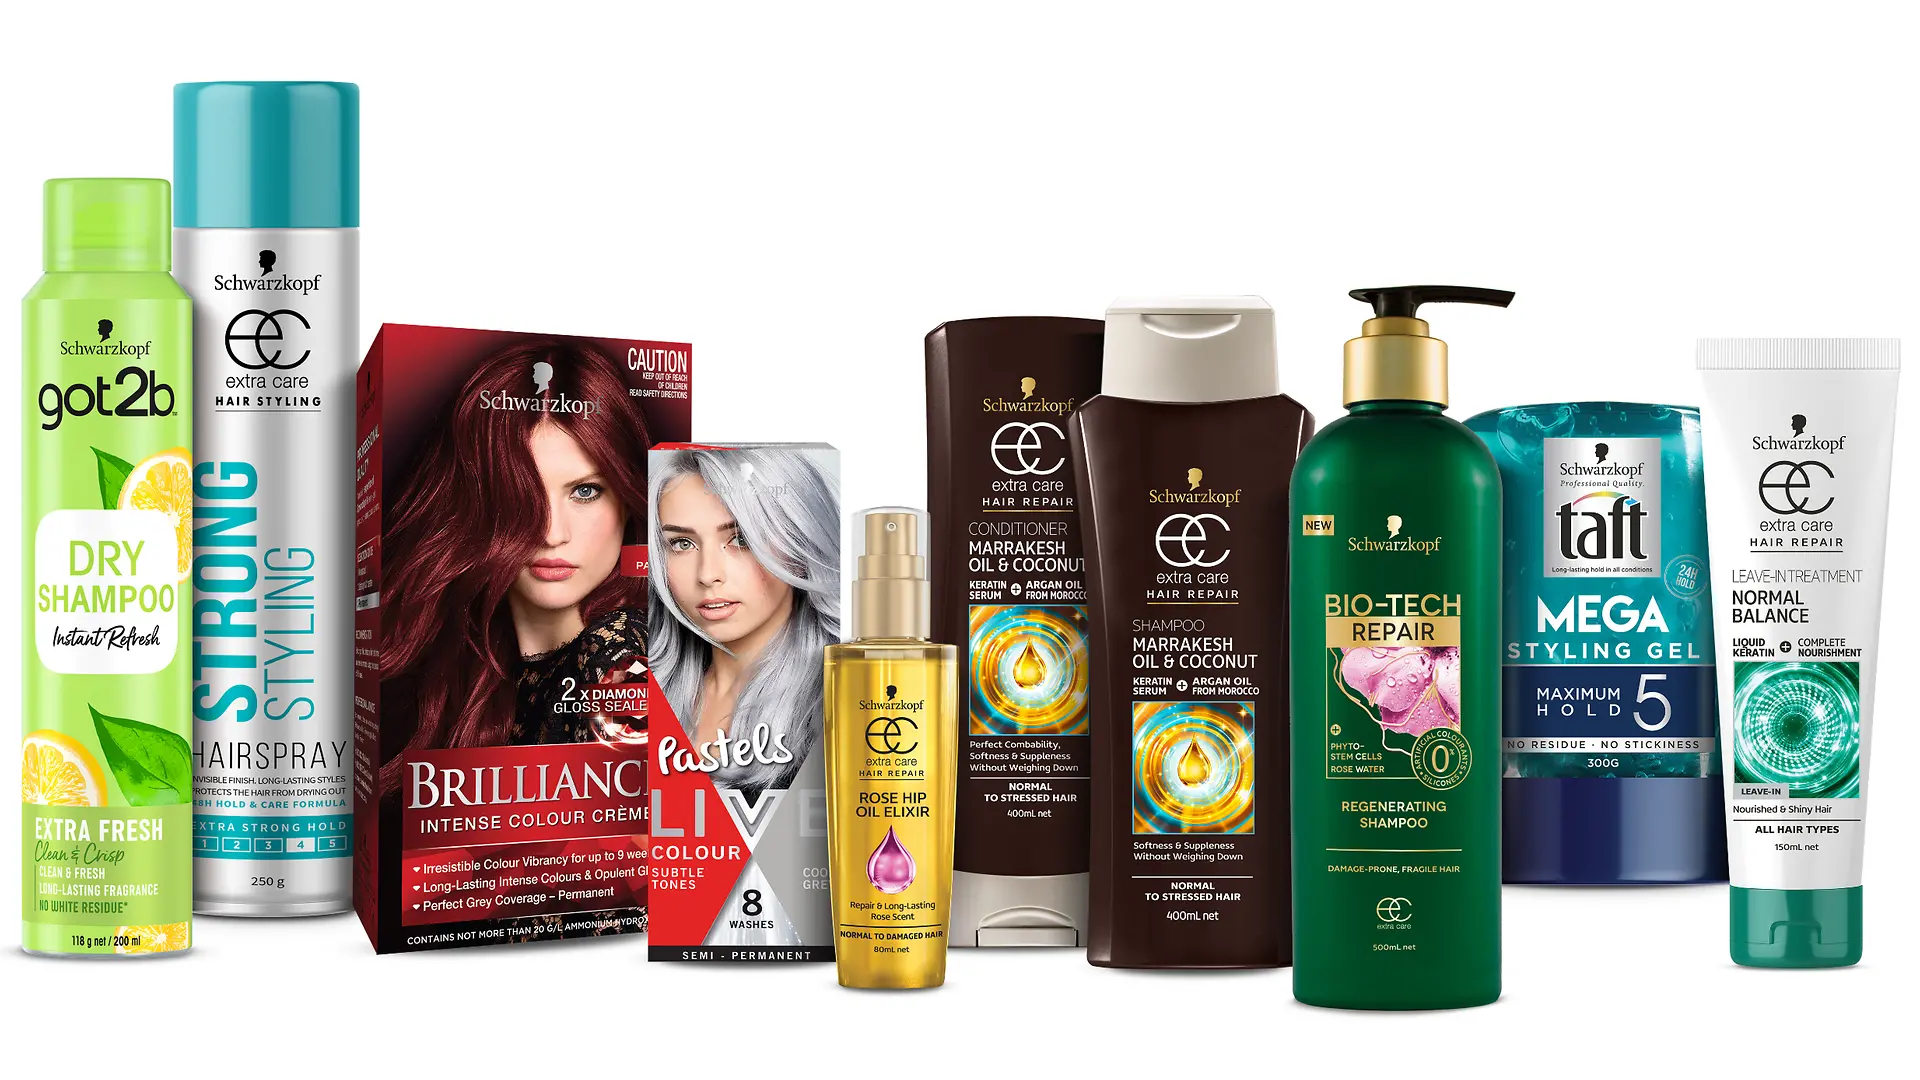 Under the Schwarzkopf Cares Recycling Program, used packaging is cleaned and melted into hard plastic that can be remolded to make new recycled products.